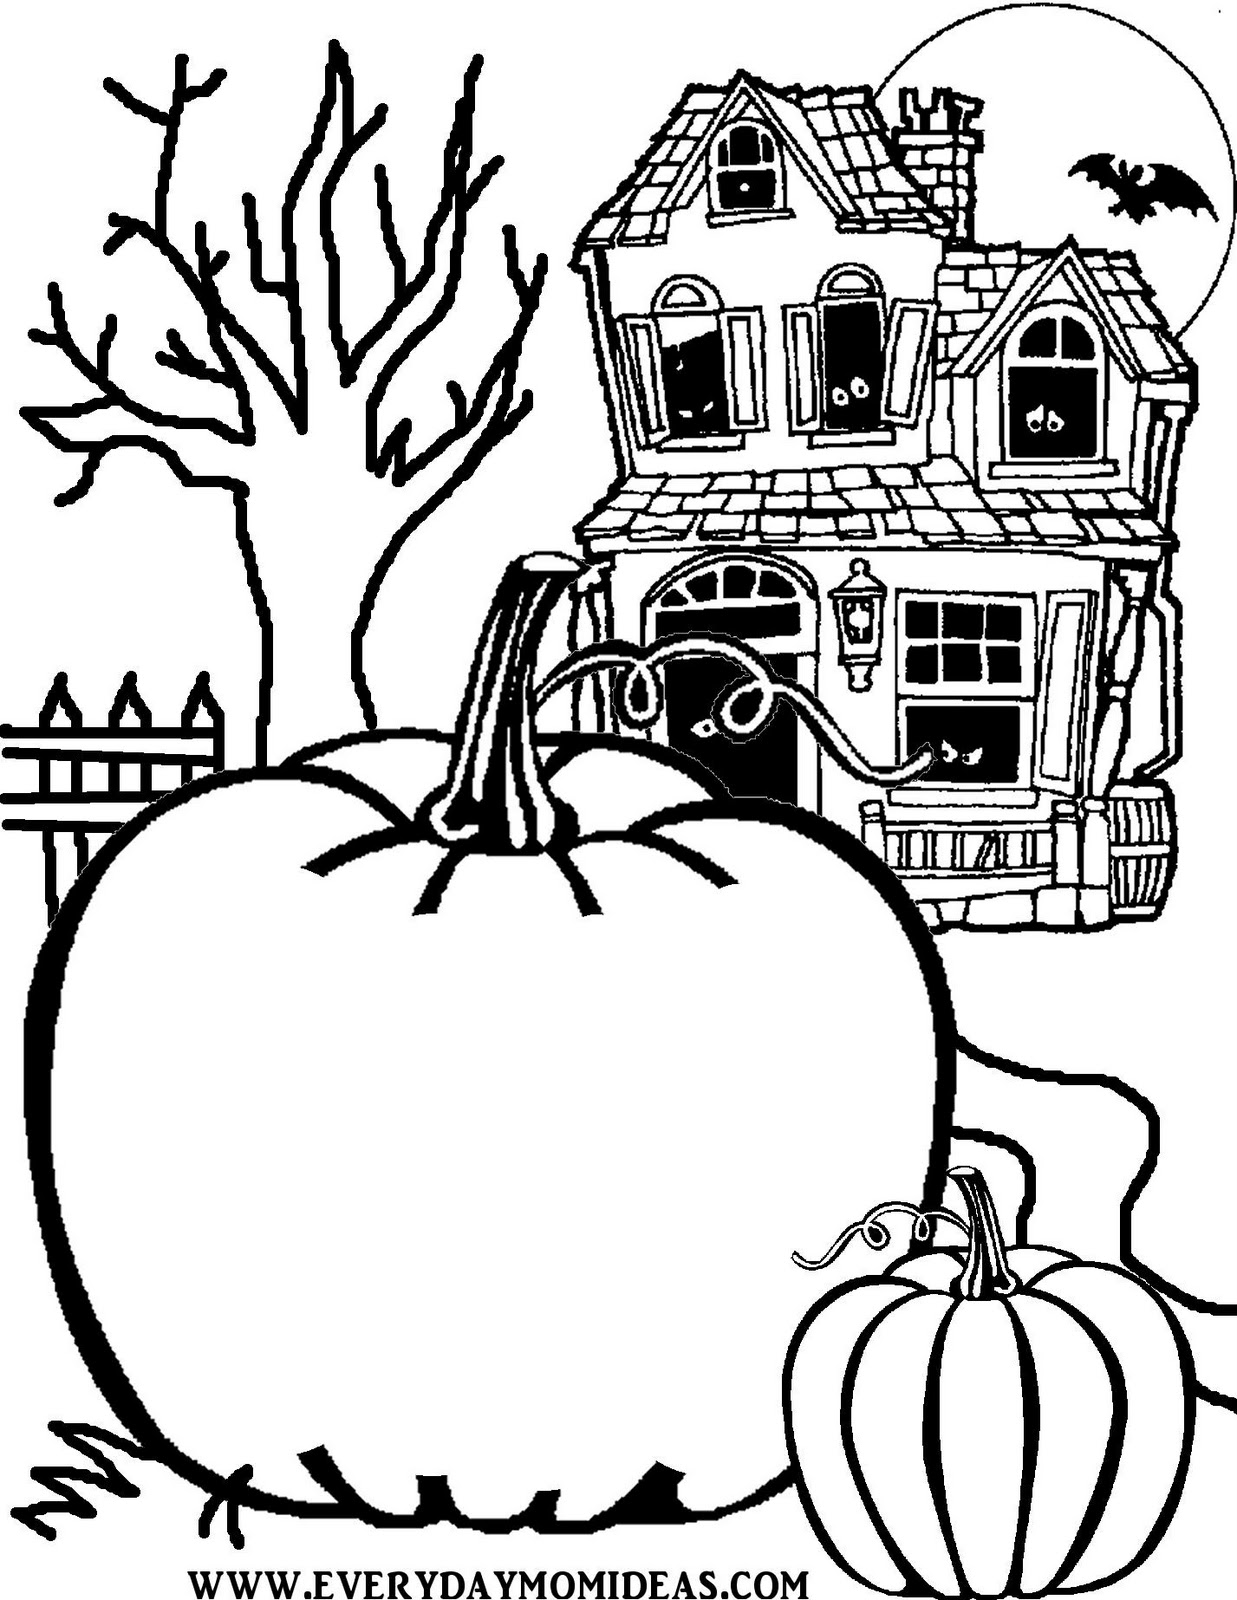 Download Jack O Lantern Coloring Pages to Print